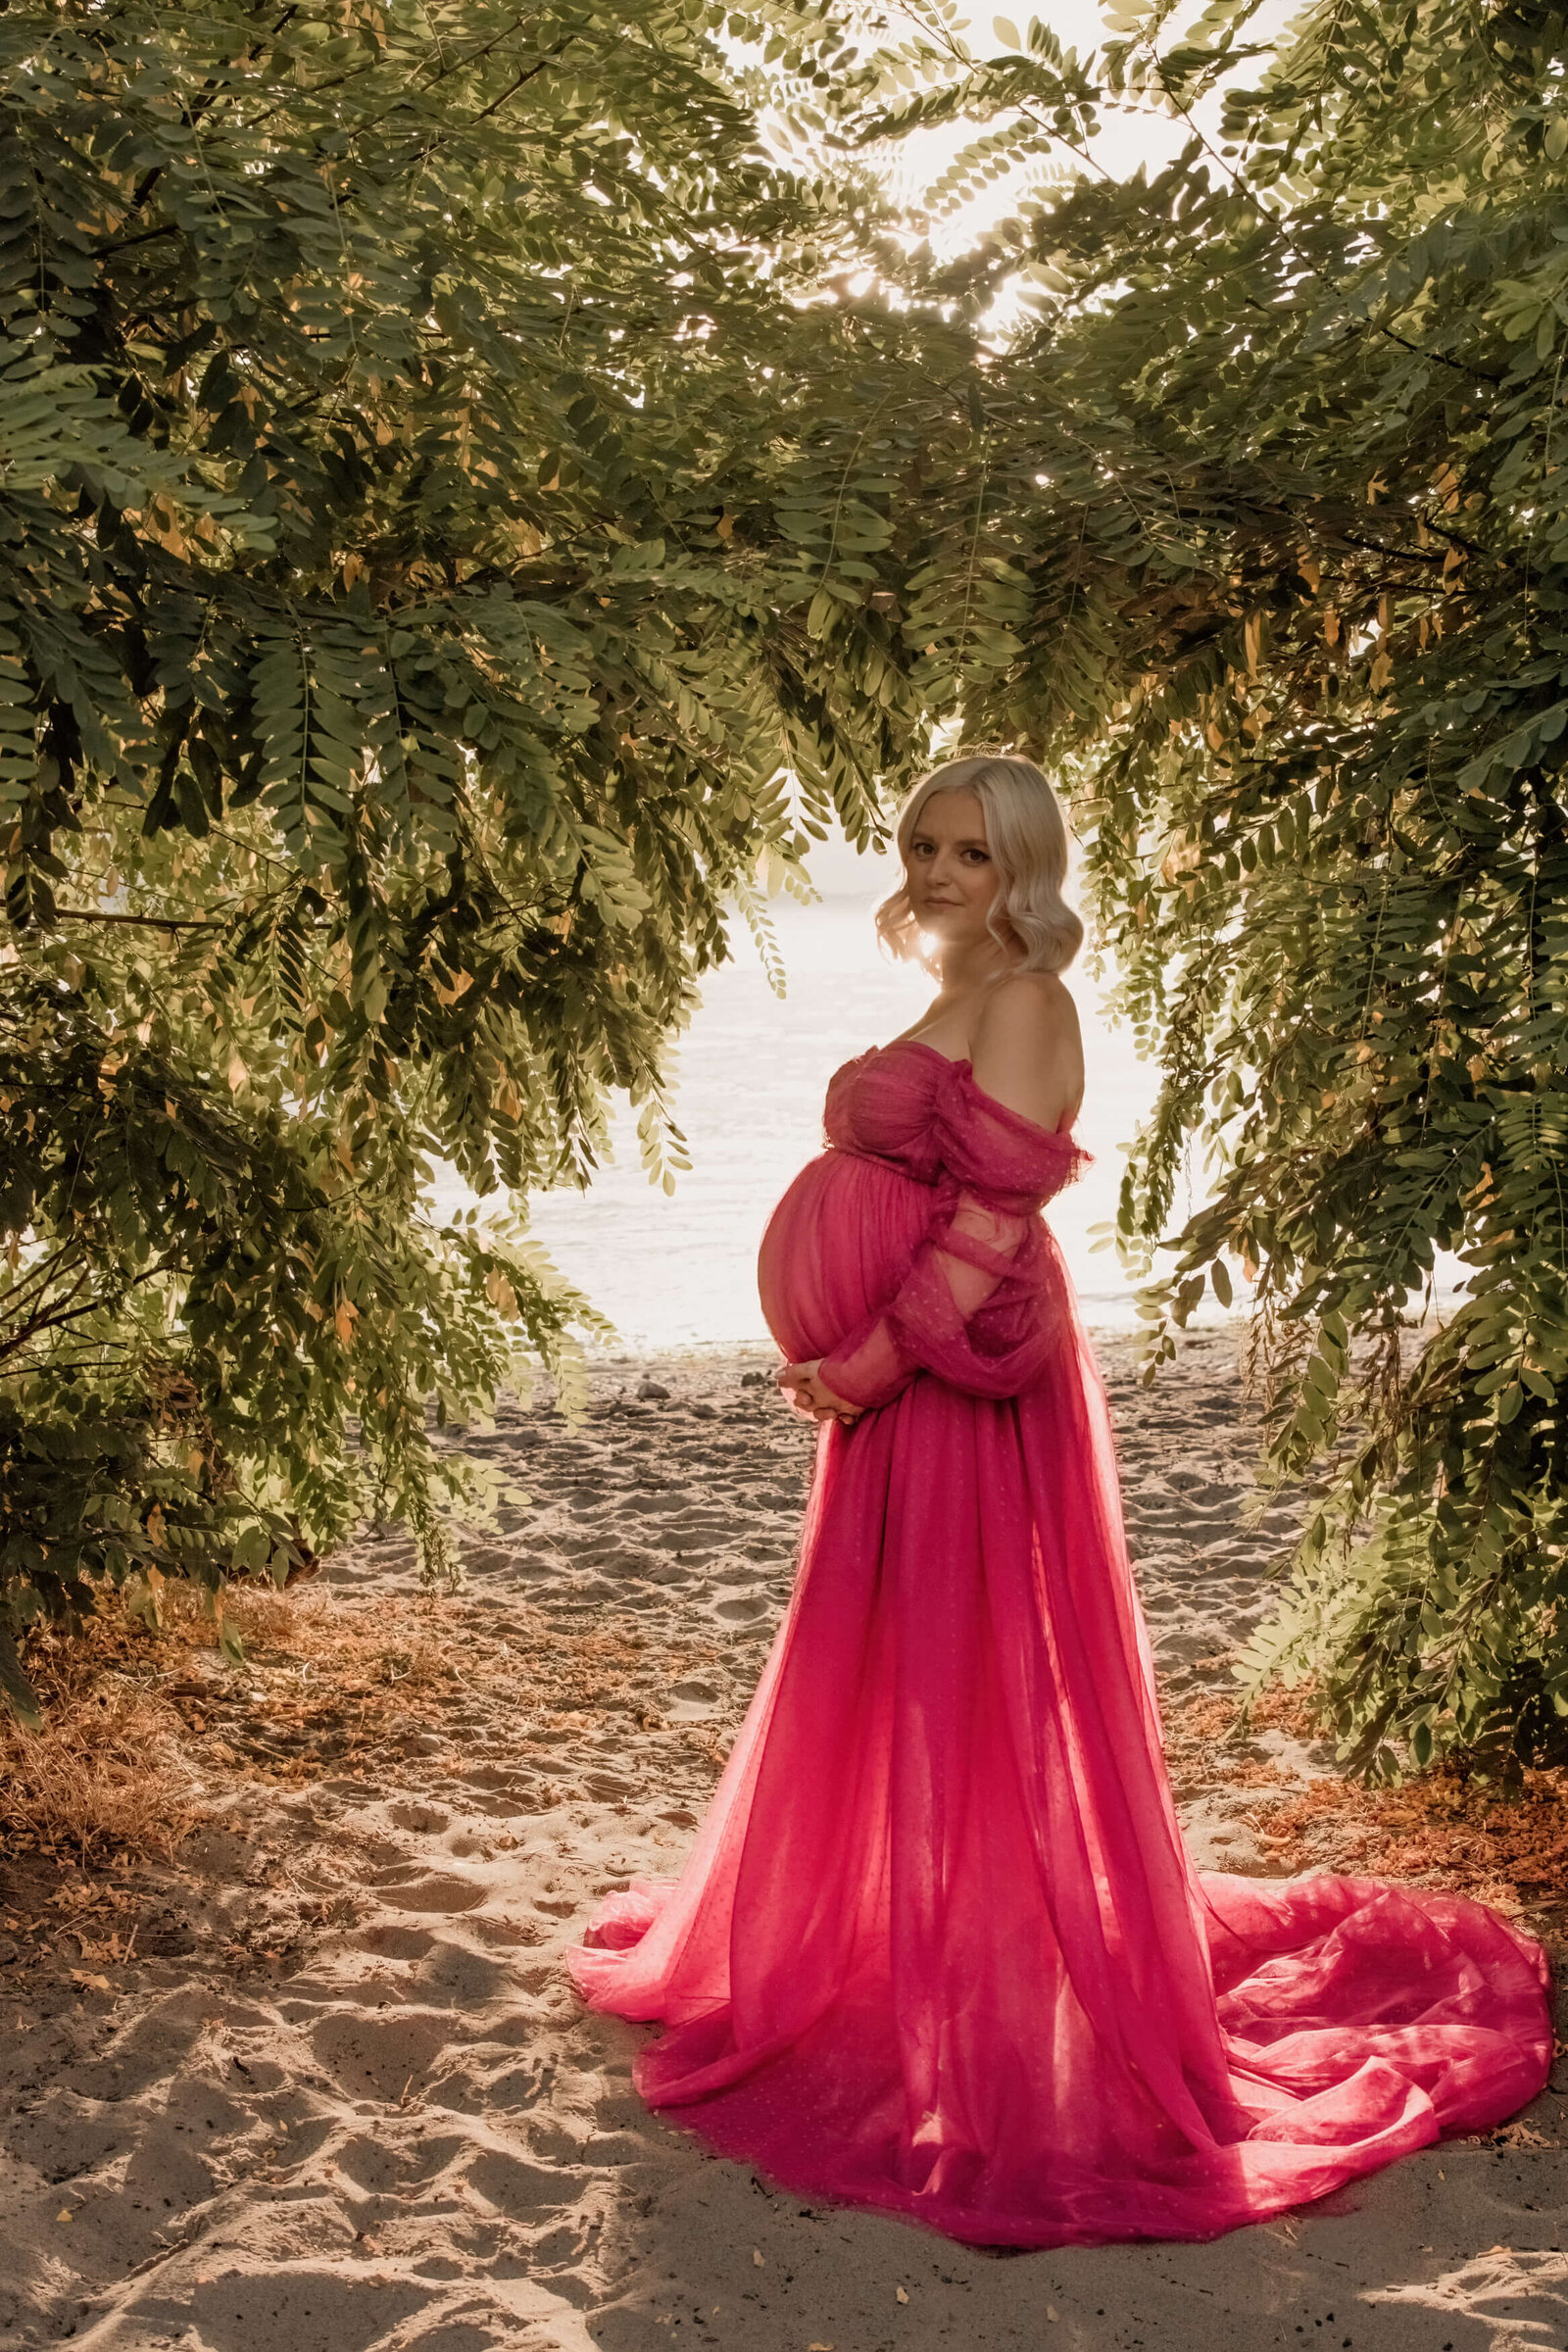 Pregnant woman in pink dress standing in the sun.